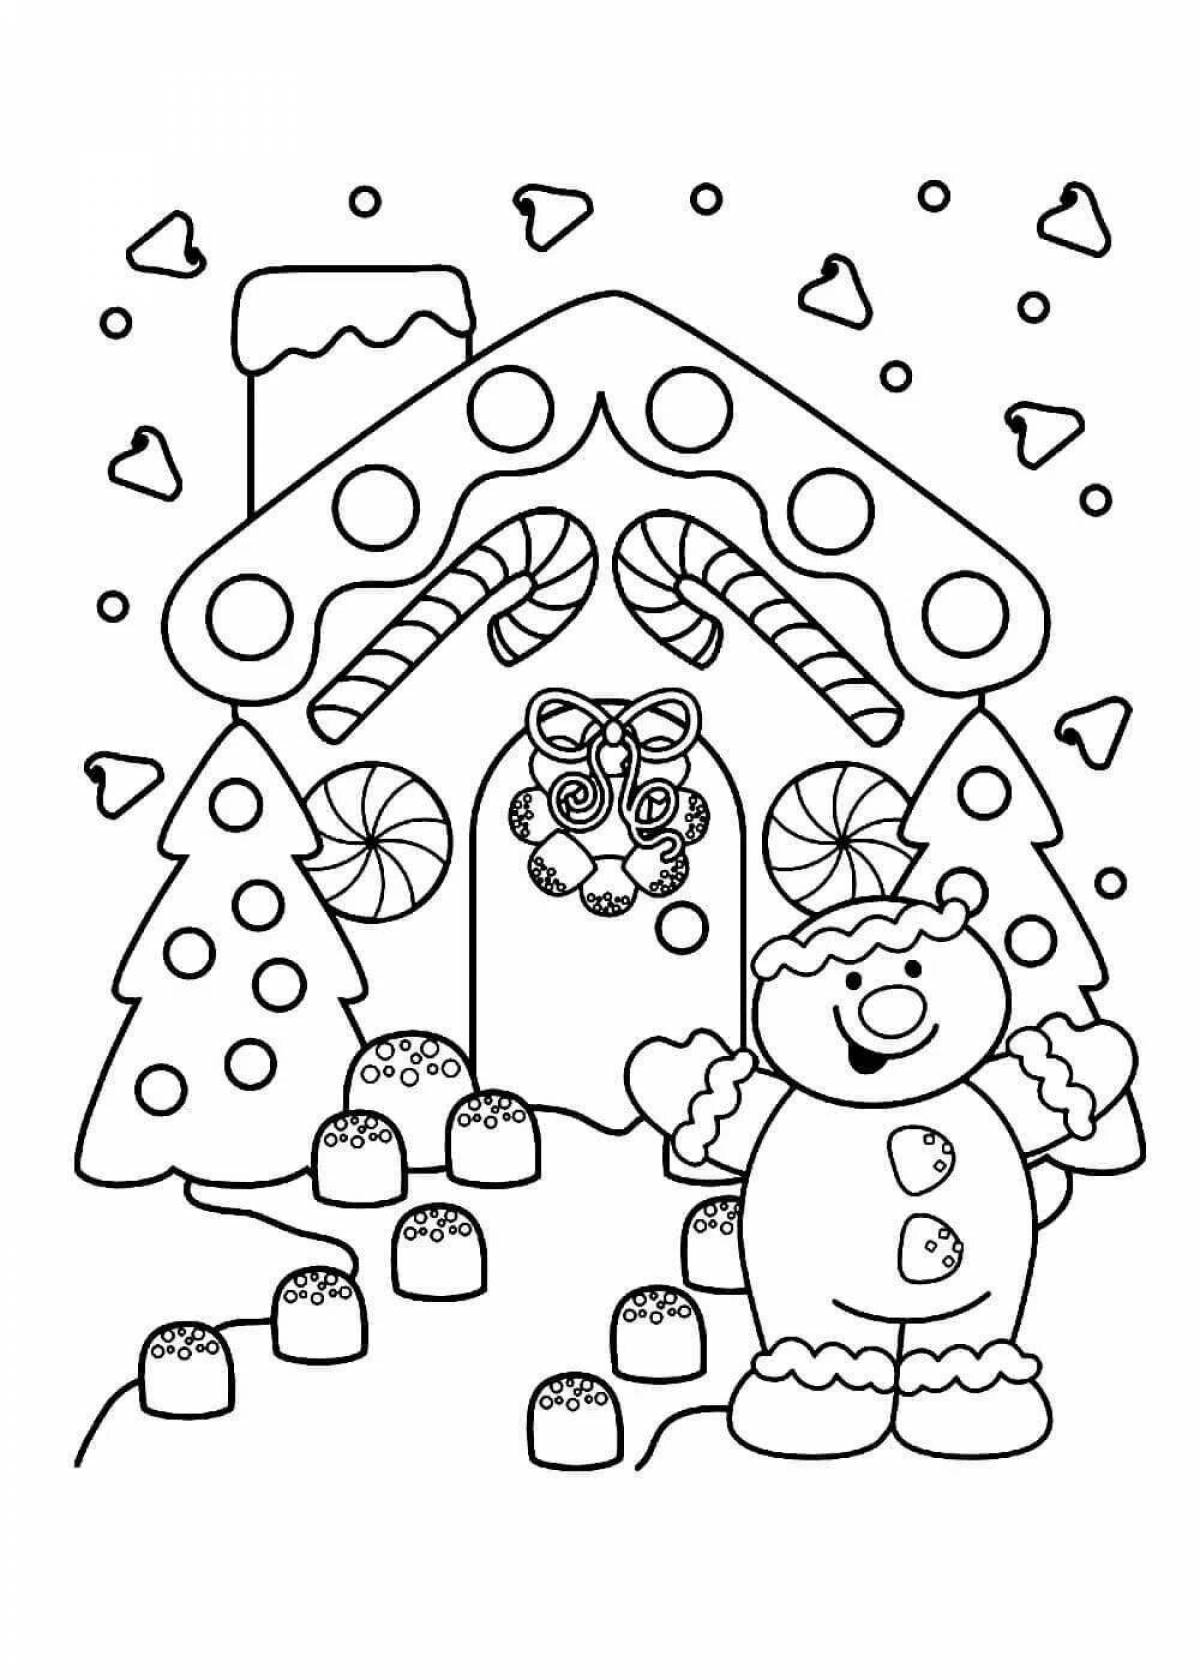 Cute Christmas gingerbread house coloring book